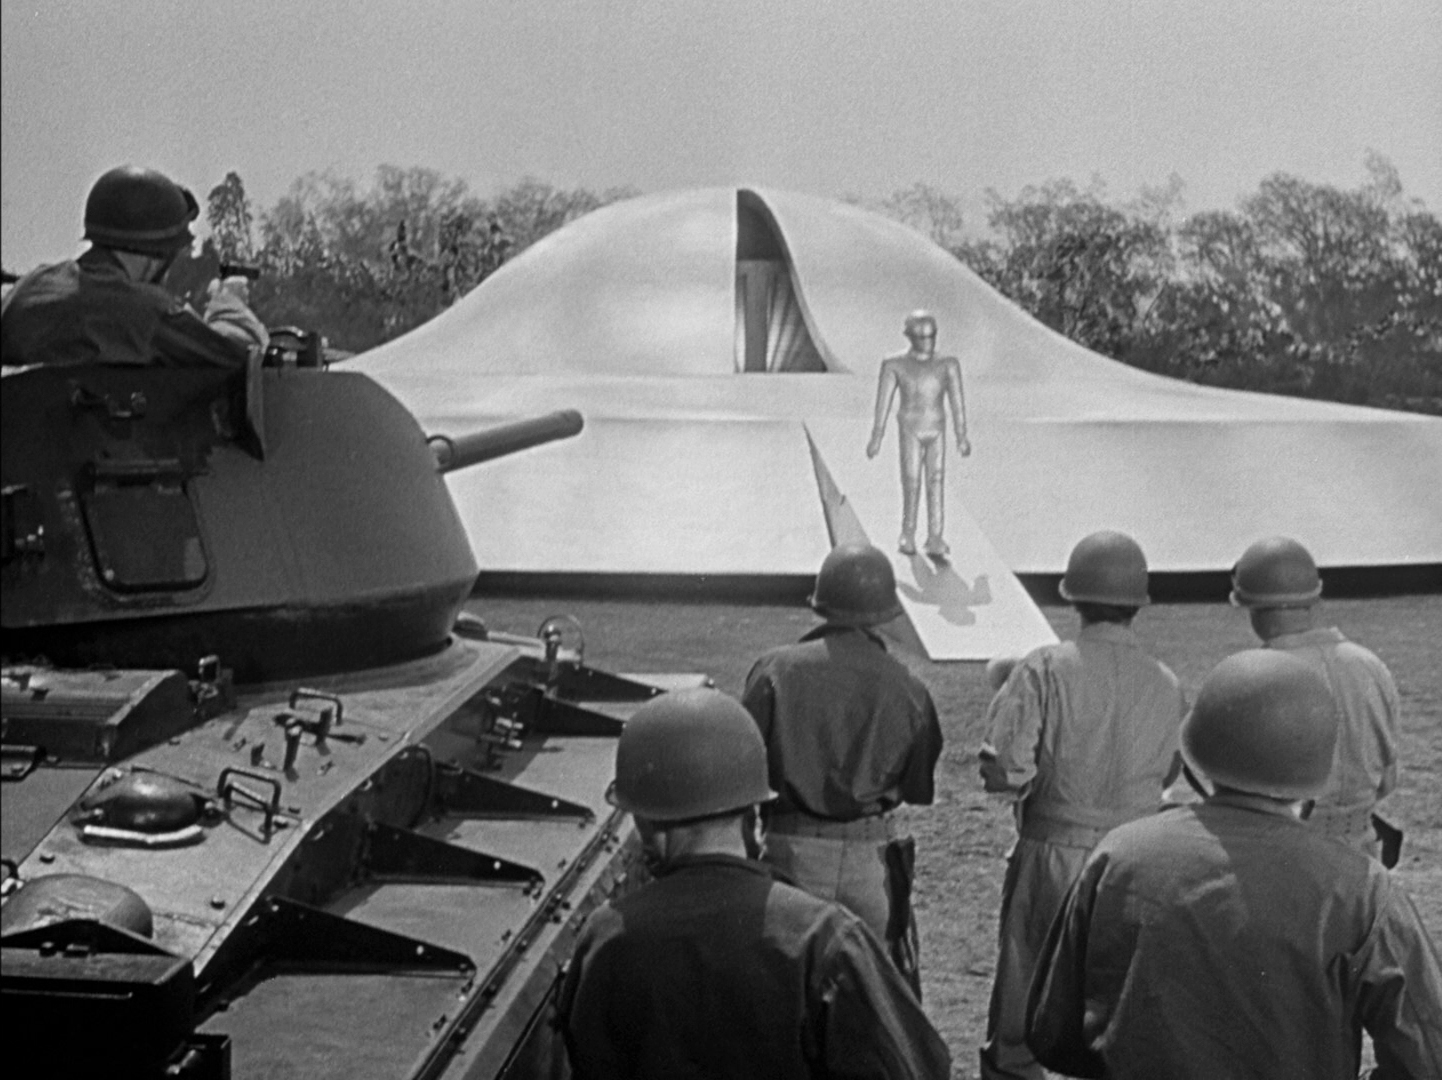 The Day The Earth Stood Still (1951) Backgrounds, Compatible - PC, Mobile, Gadgets| 1442x1080 px